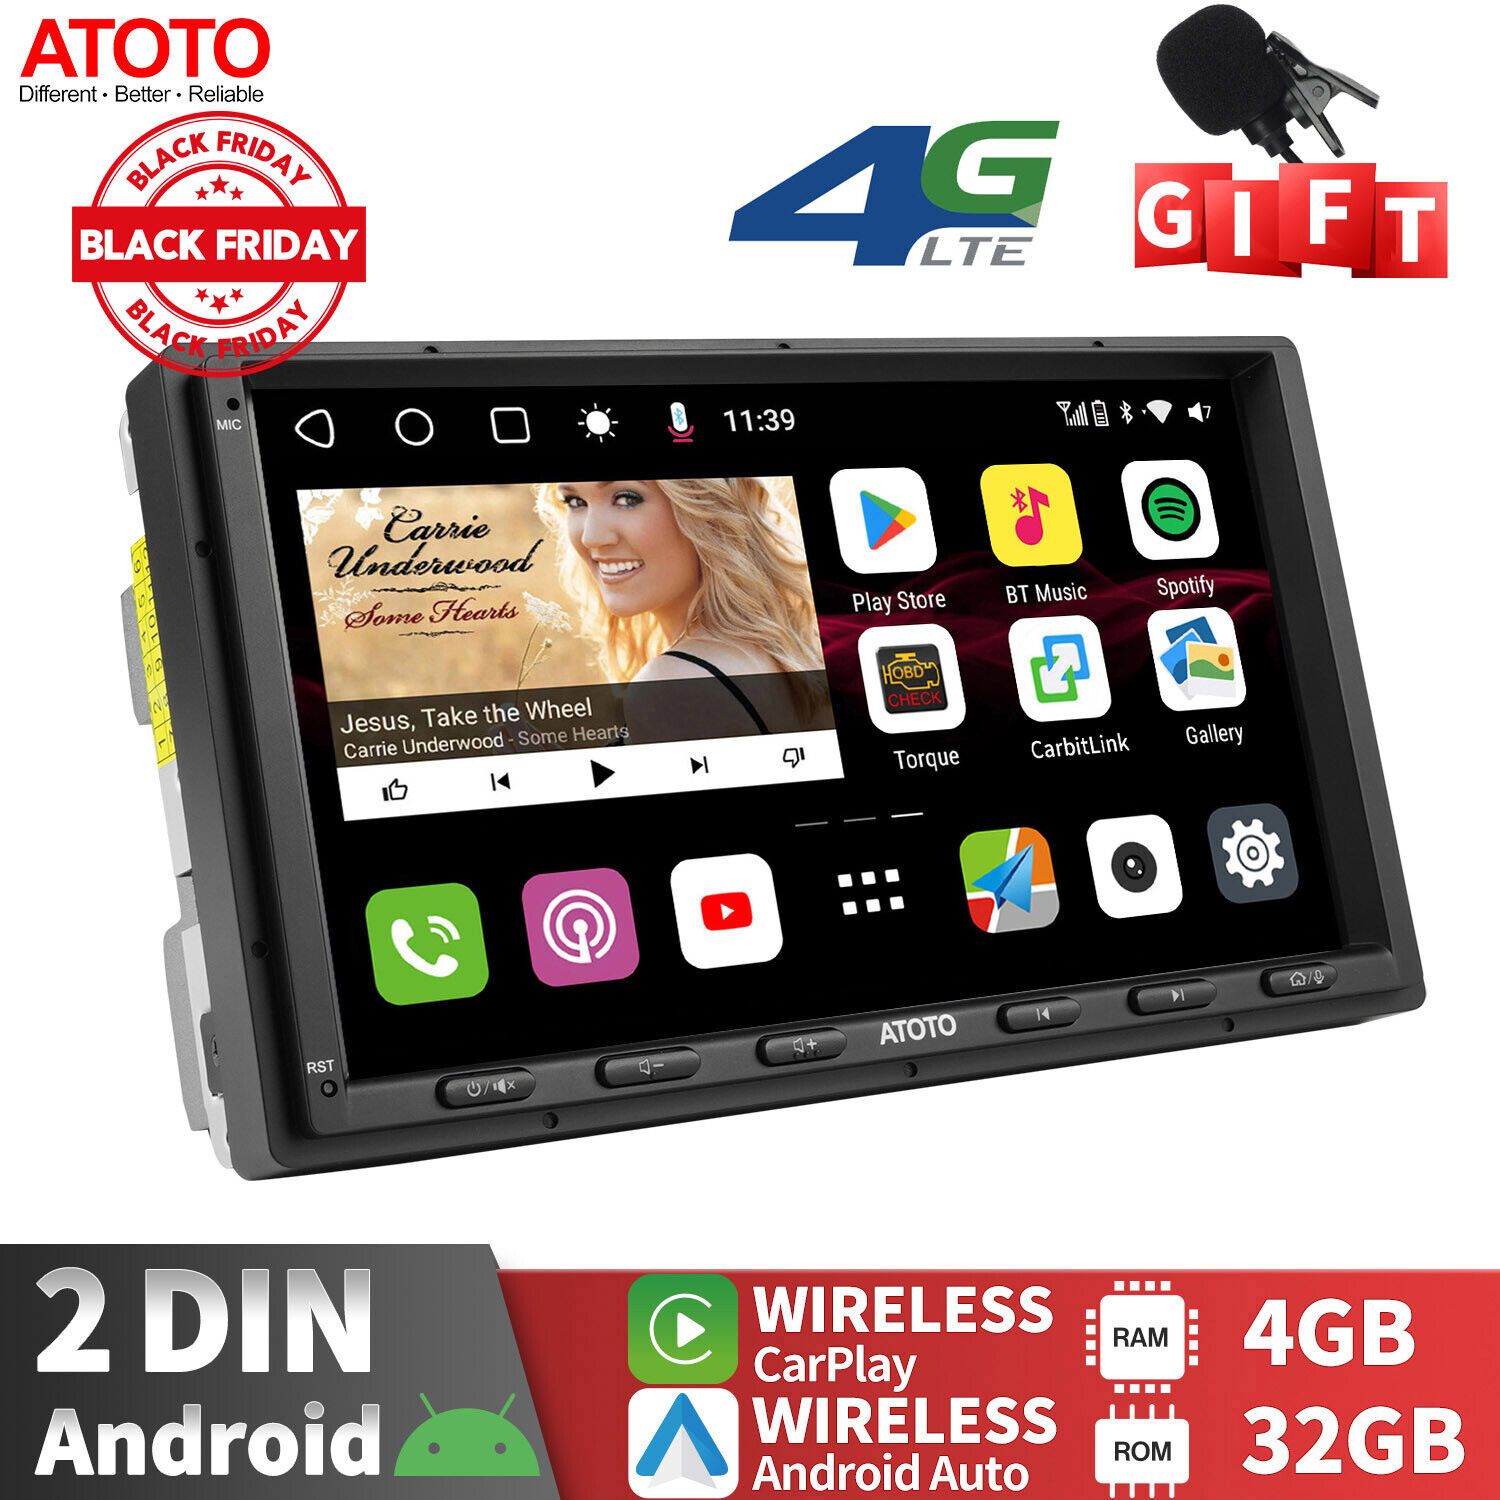 ATOTO S8 MS 7IN 2DIN 4G LTE Car Stereo-4+32G Wireless Android Auto & CarPlay IPS